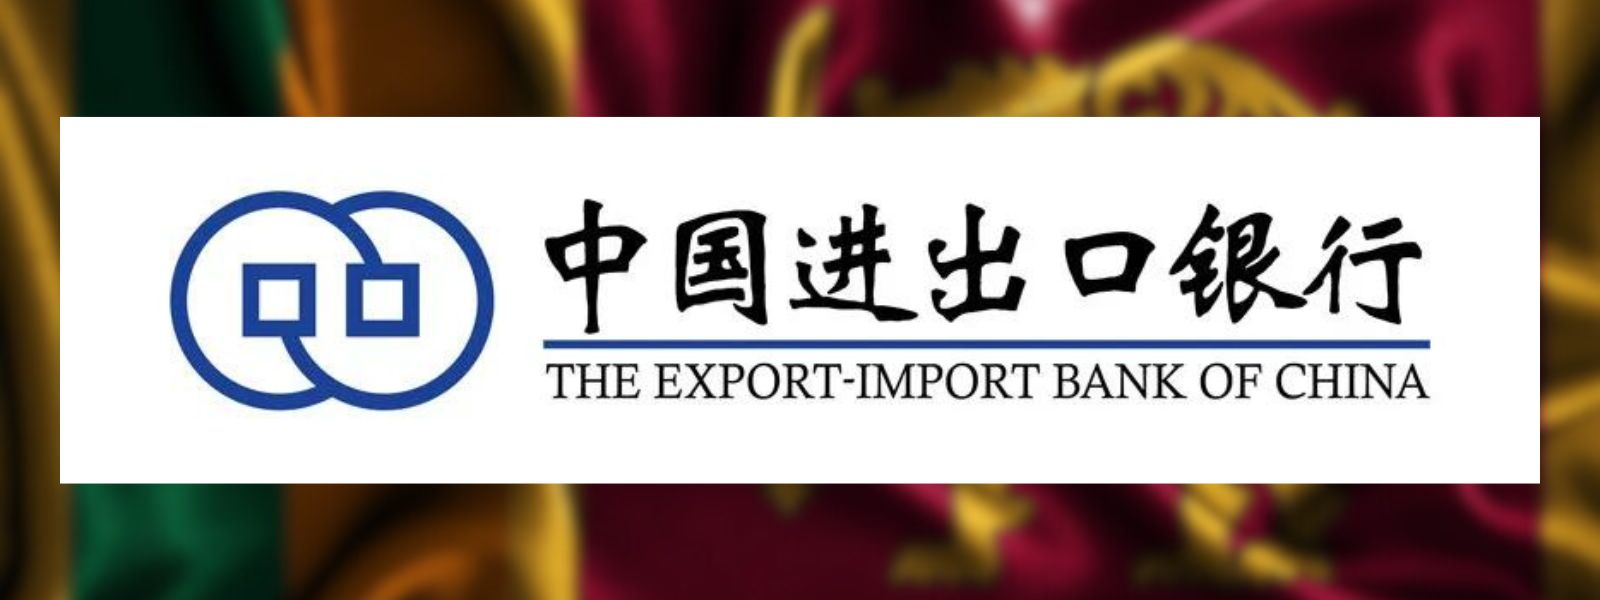 SL reaches agreement with China Exim Bank